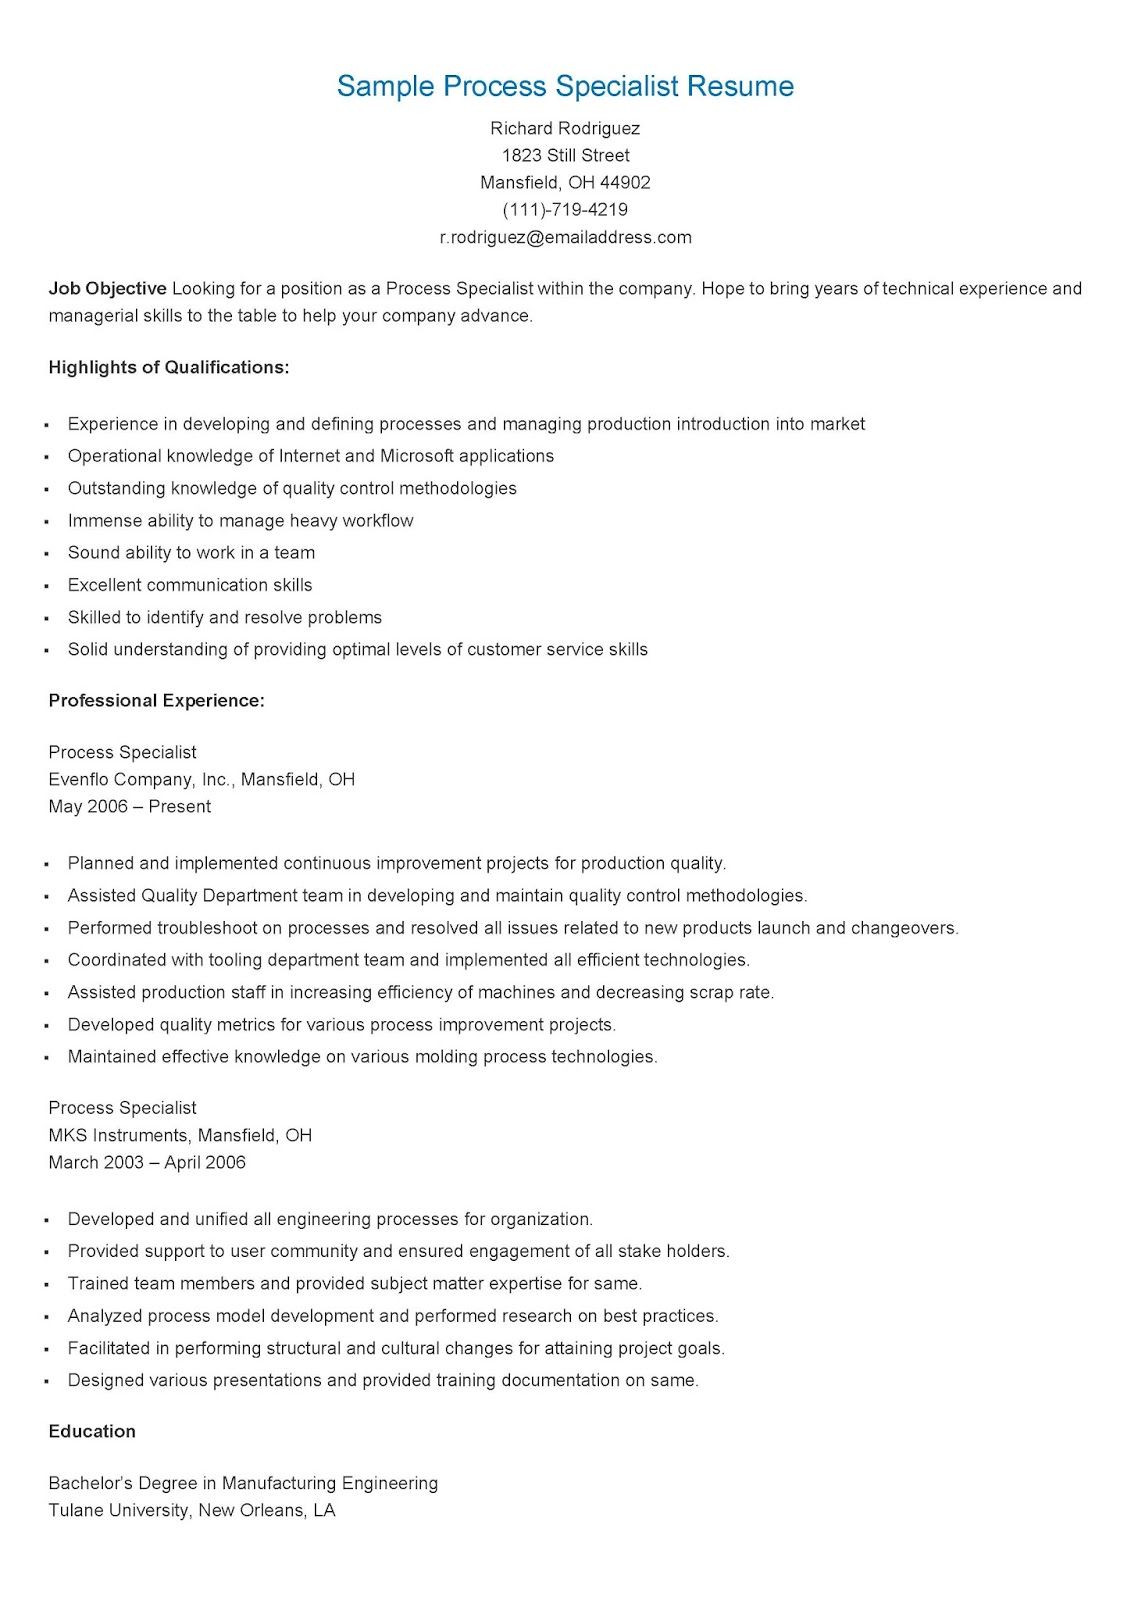 Training and Development Specialist Resume Sample Sample Process Specialist Resume Resume, Specialist, Process